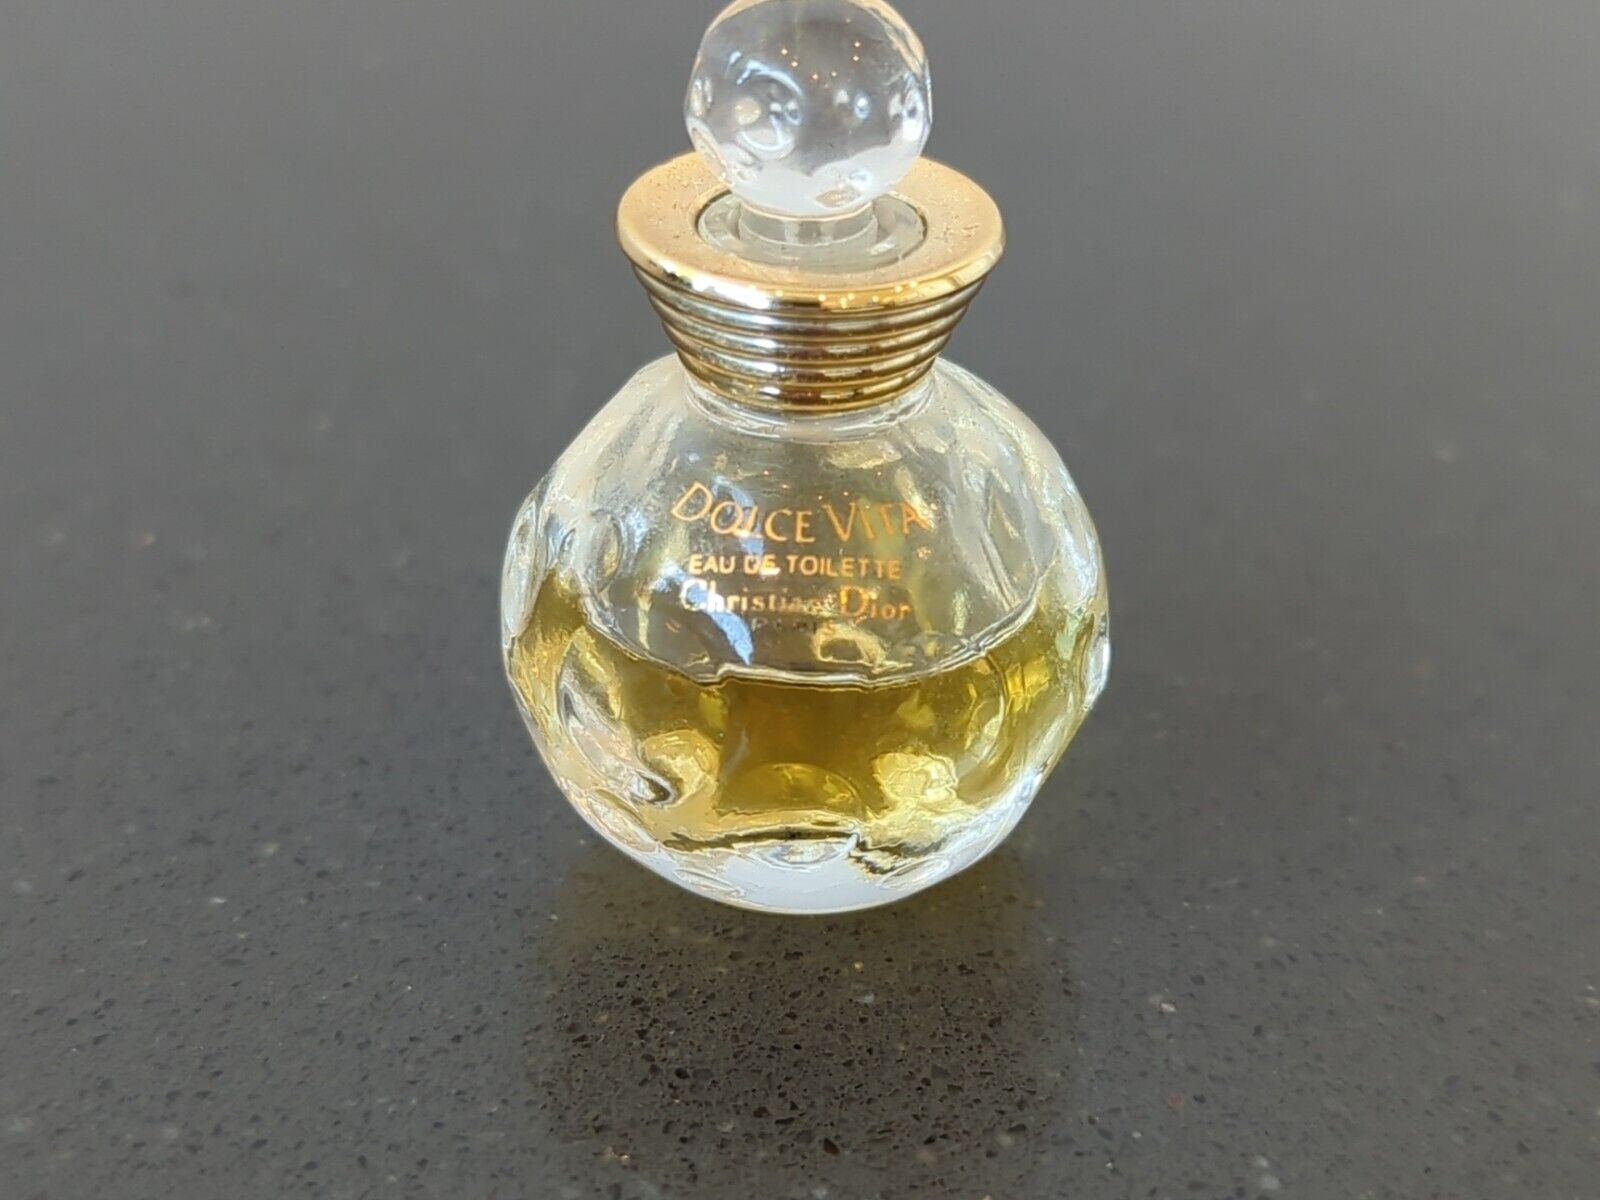 Vintage Dolce Vita by Christian Dior EDT Miniature